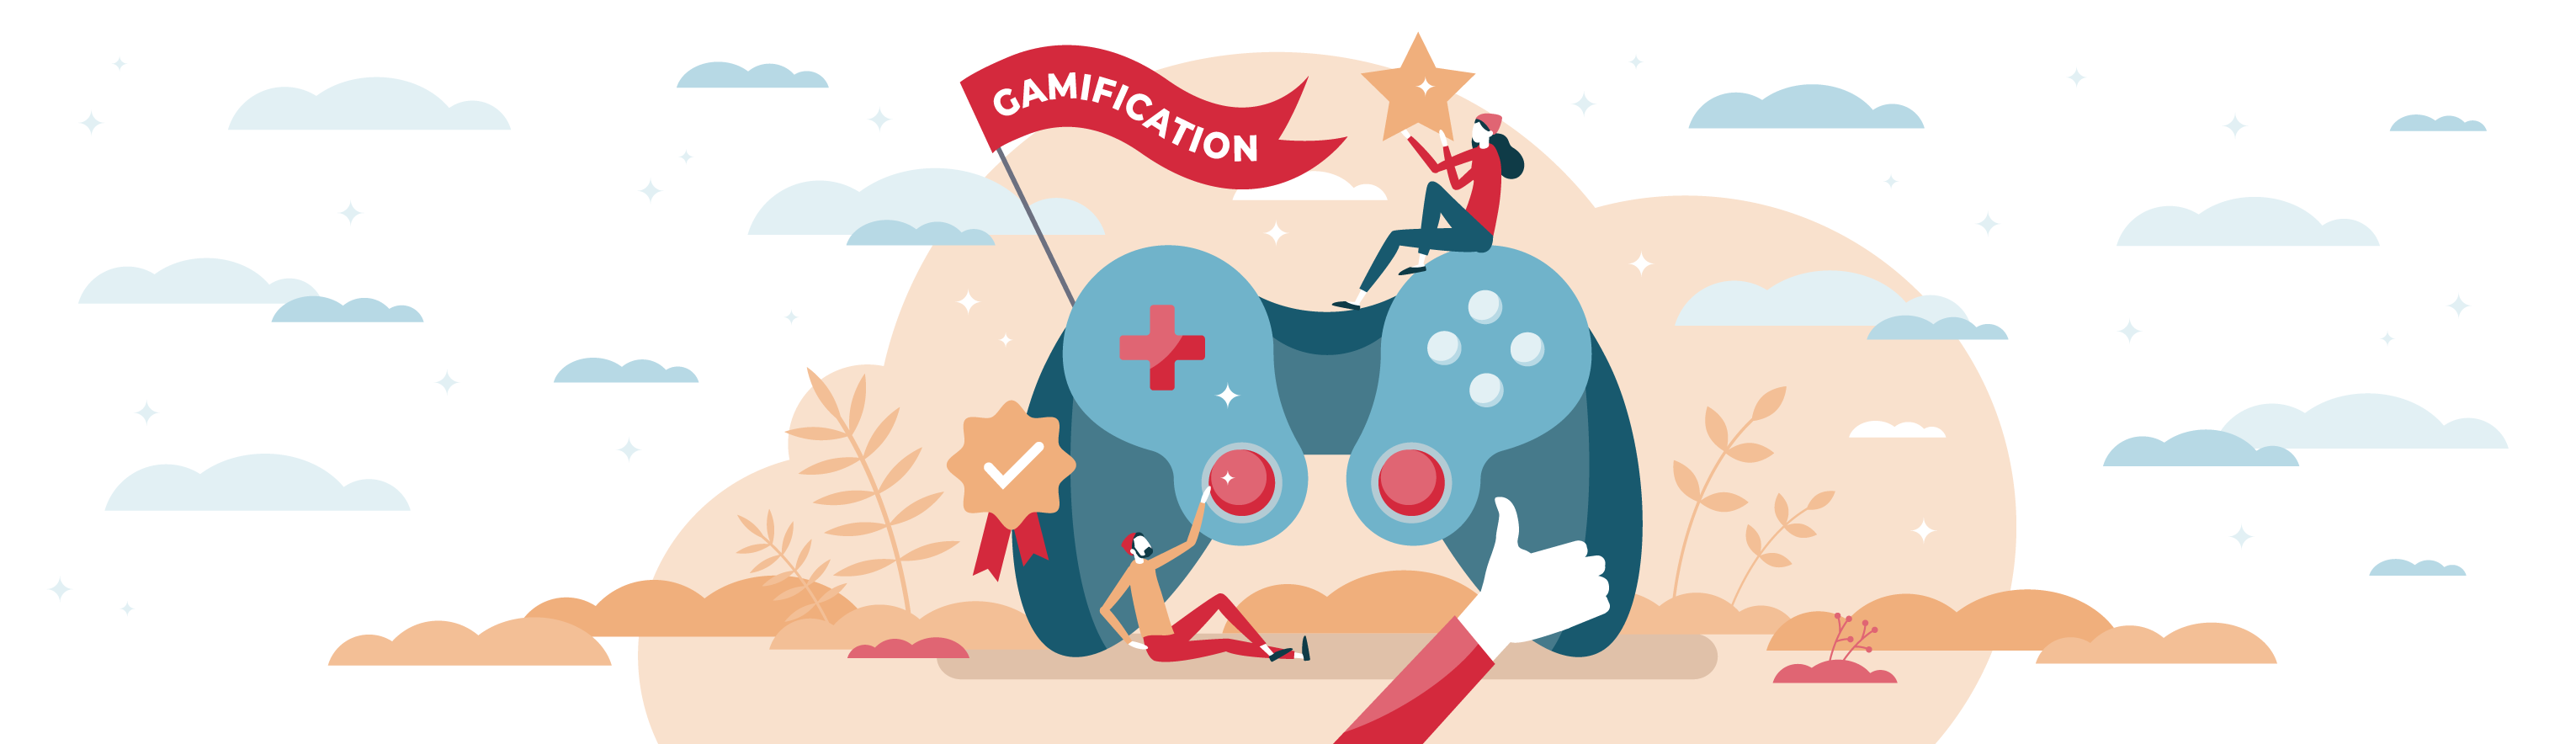 gamification marketing trends 2022 2023